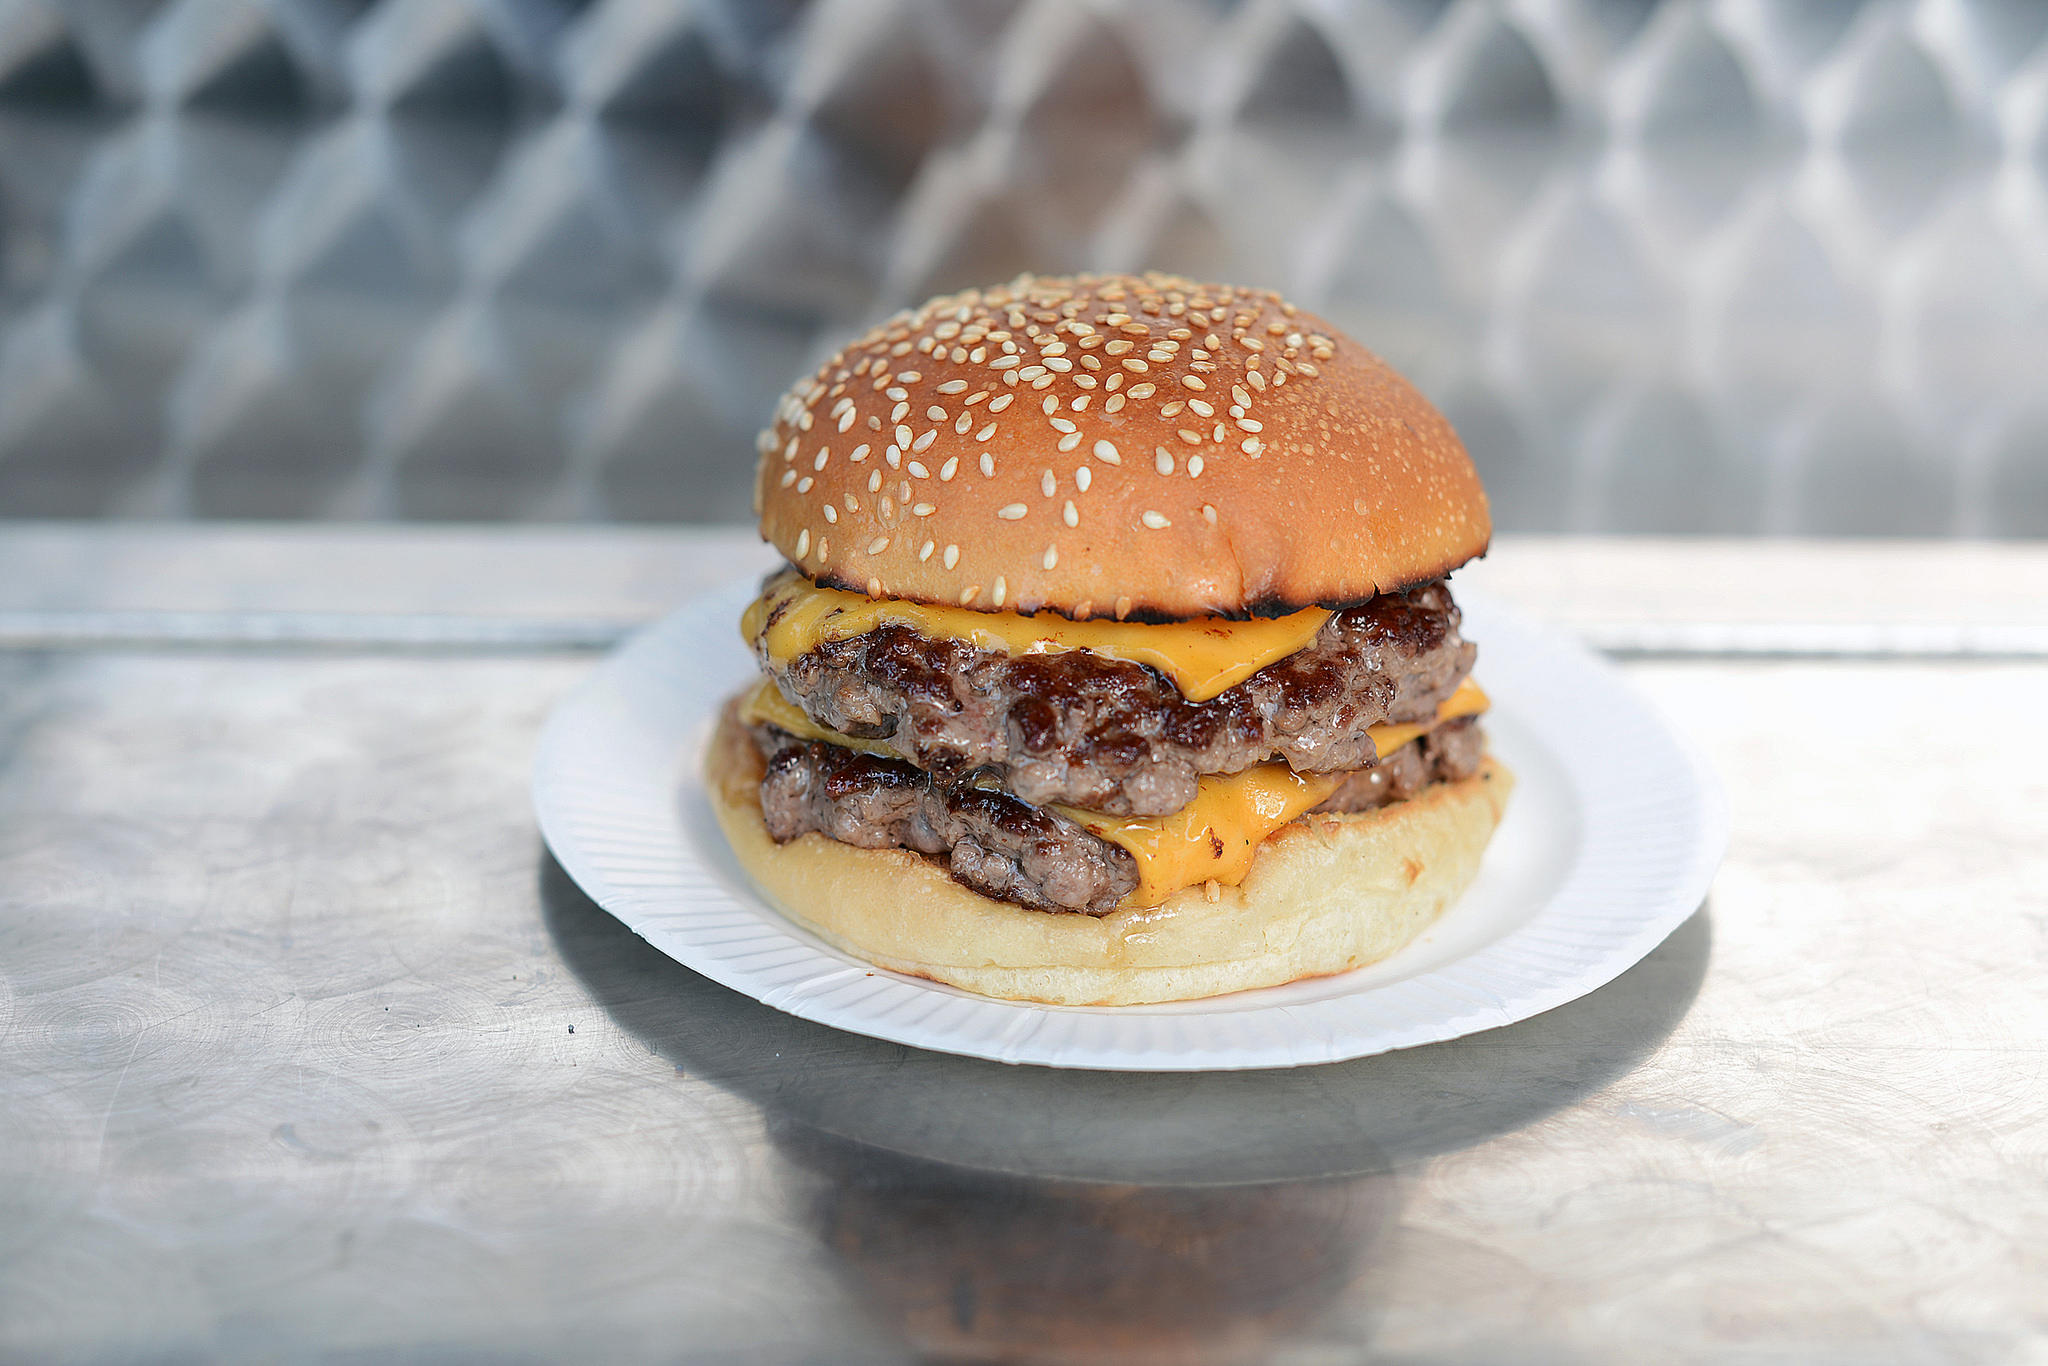 A double cheeseburger on a white plate, sitting on a stainless steel counter.